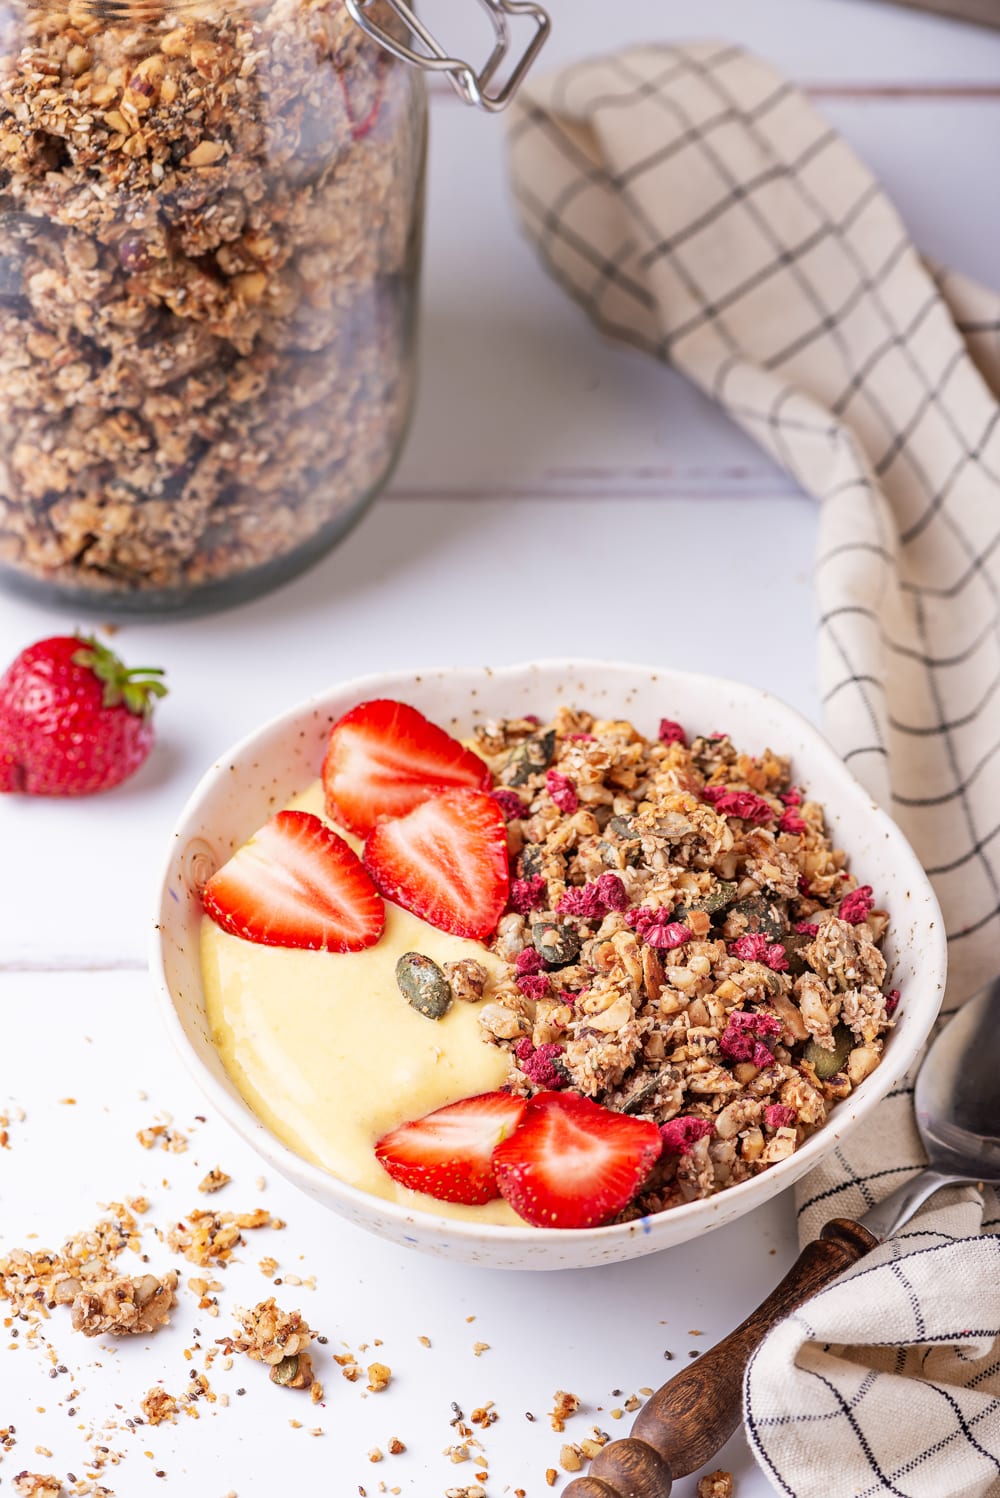 Granola and yogurt in a white bowl with cut-up strawberries on top.